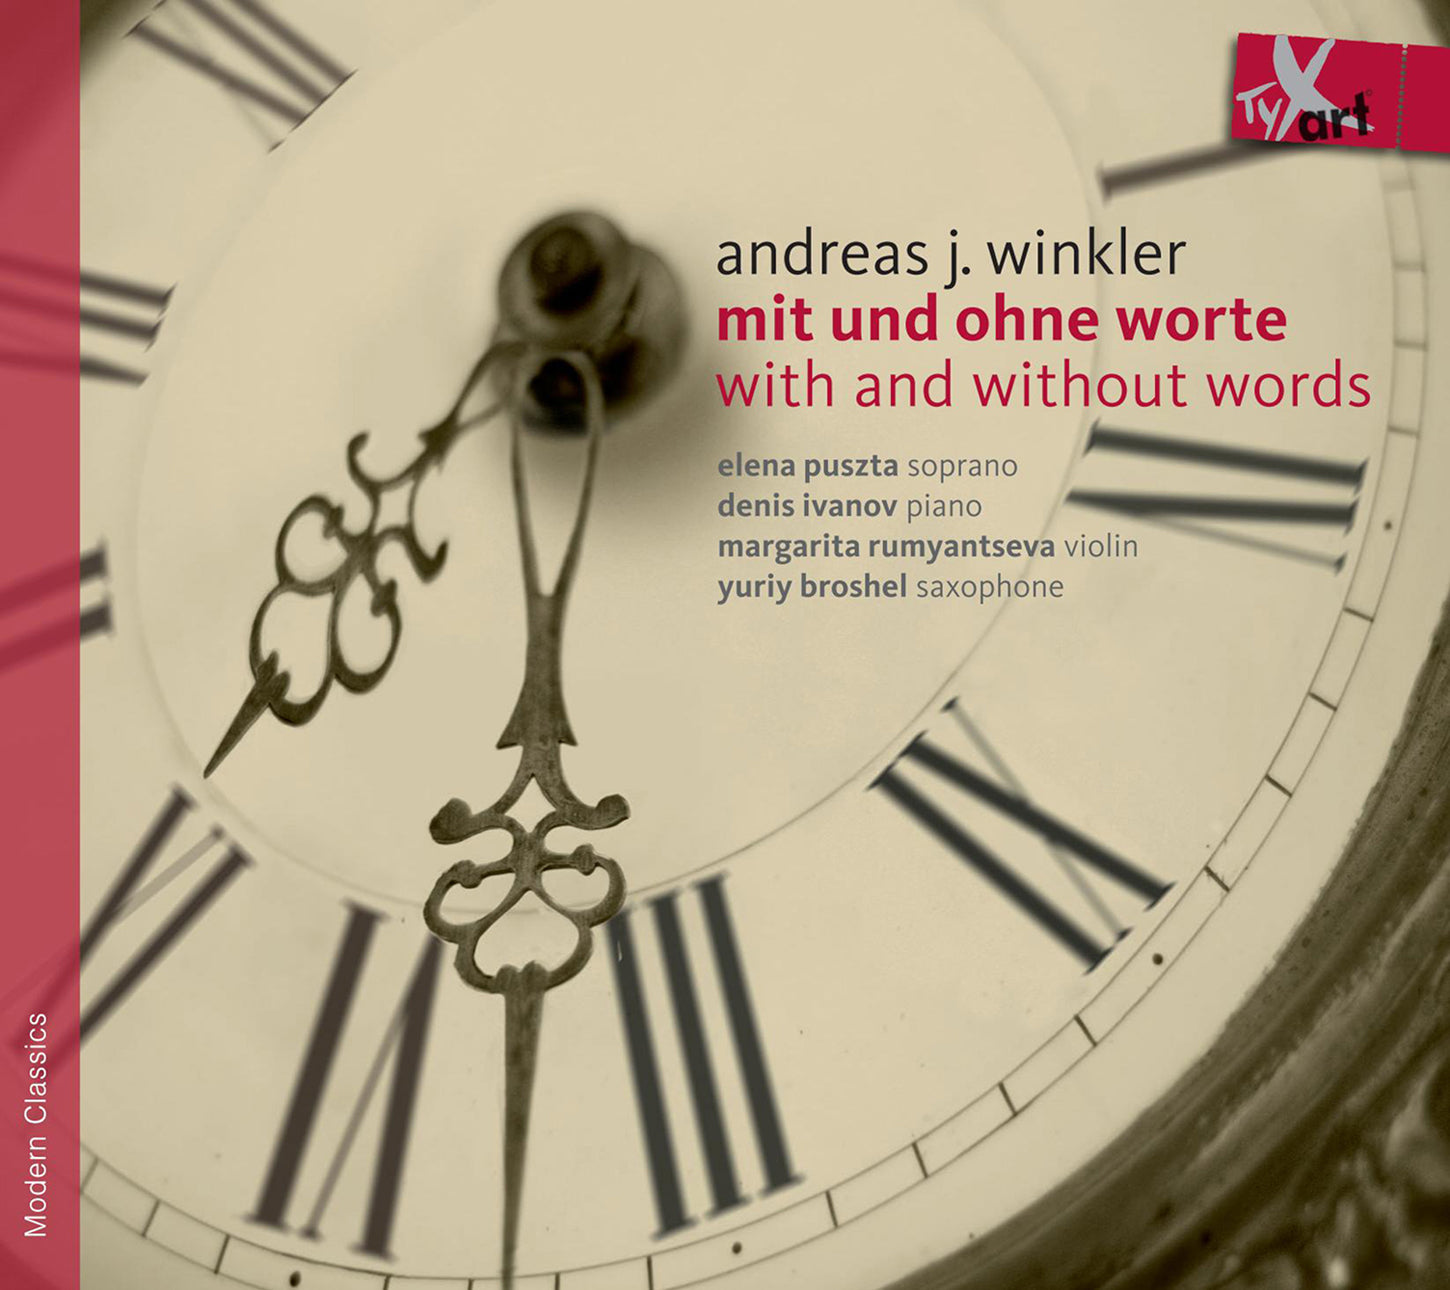 Winkler: mit und ohne worte - with and without words